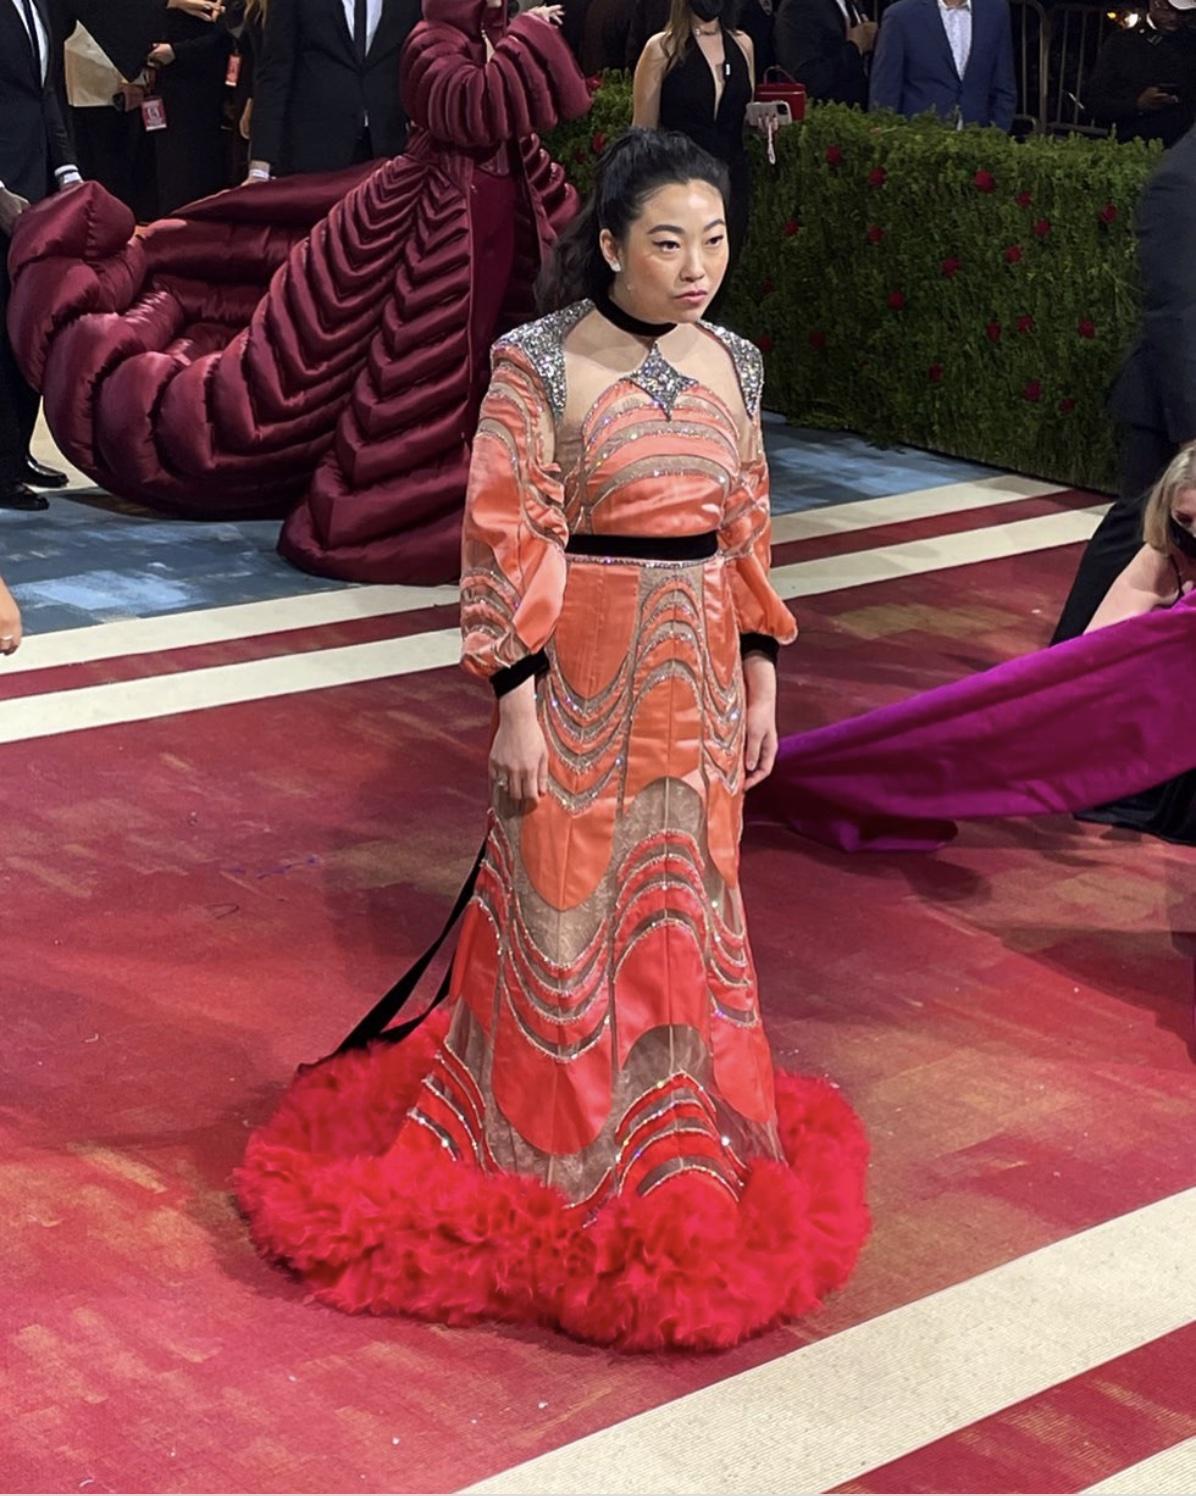 creamsicle sparkles anyone?@awkwafina serves it up on the #MetGala red carpet ✨.